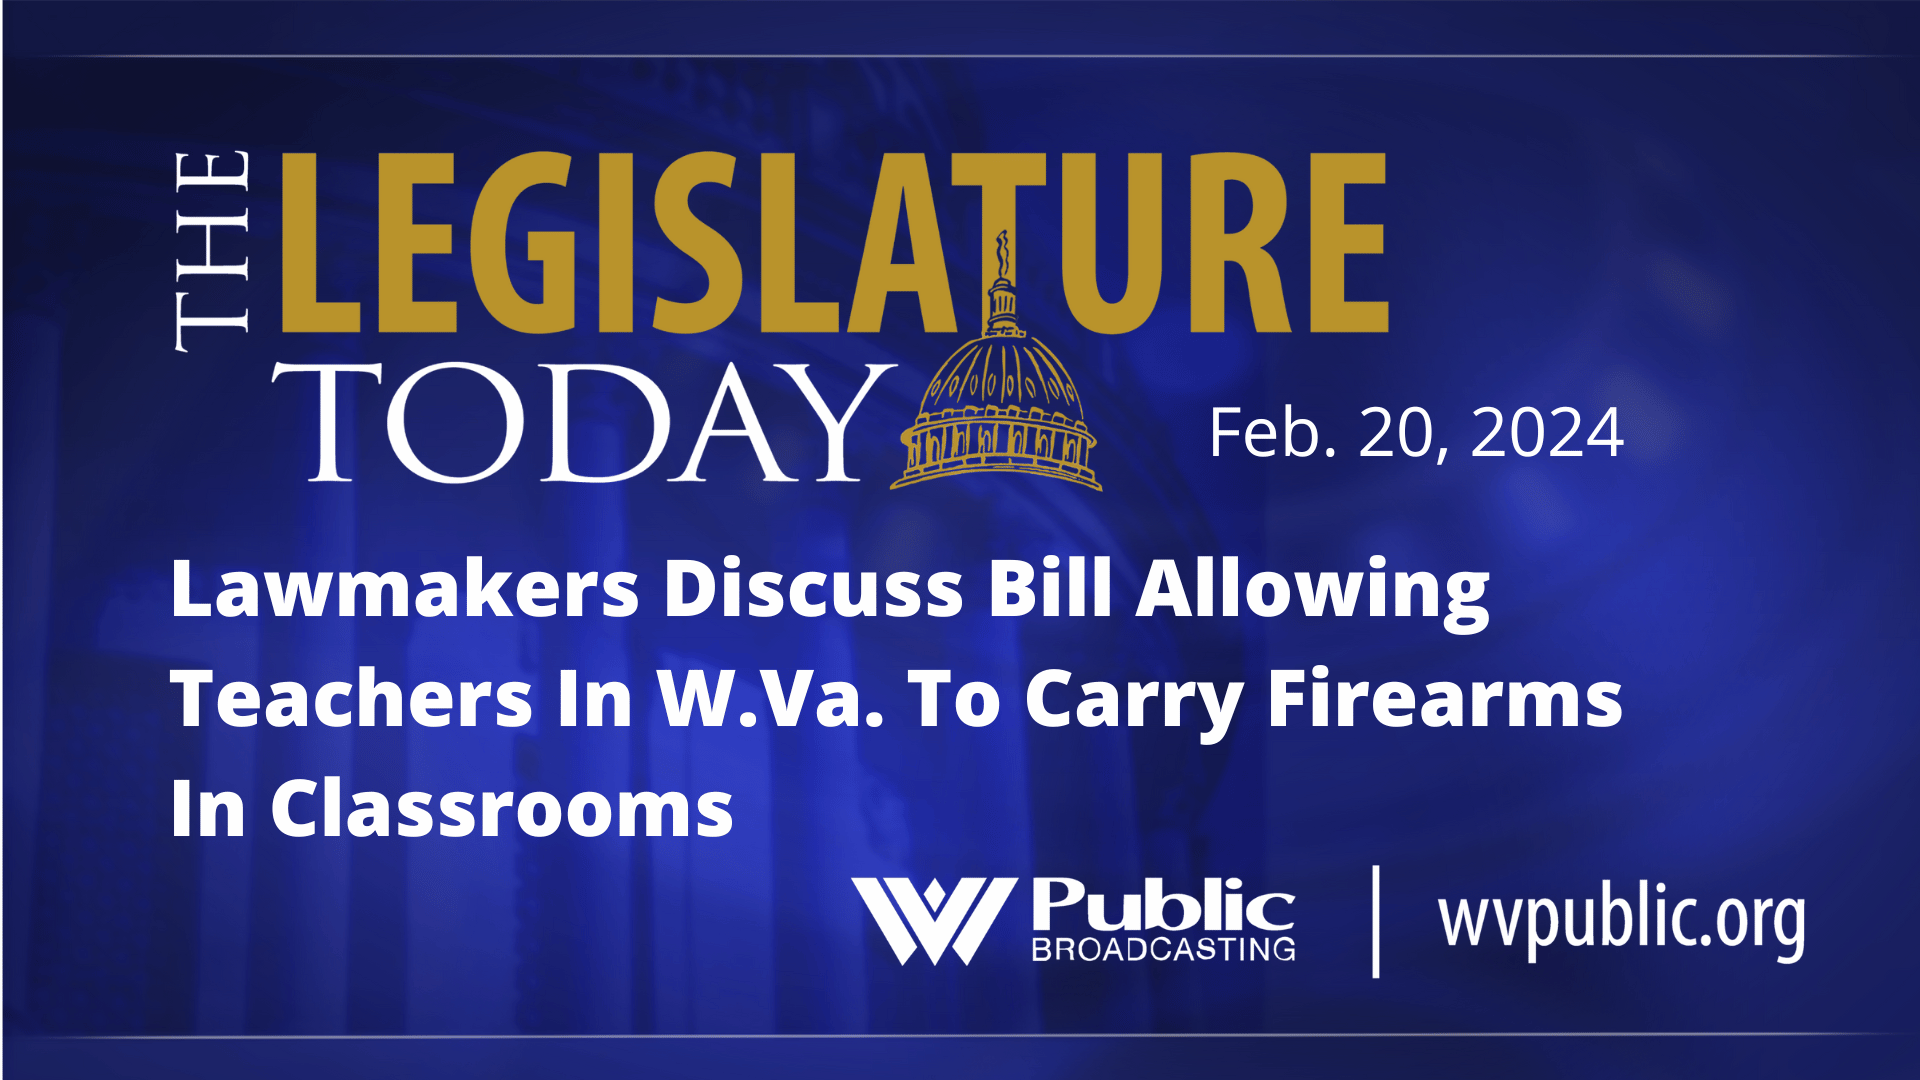 Lawmakers Discuss Bill Allowing Teachers In W.Va. To Carry Firearms In Classrooms